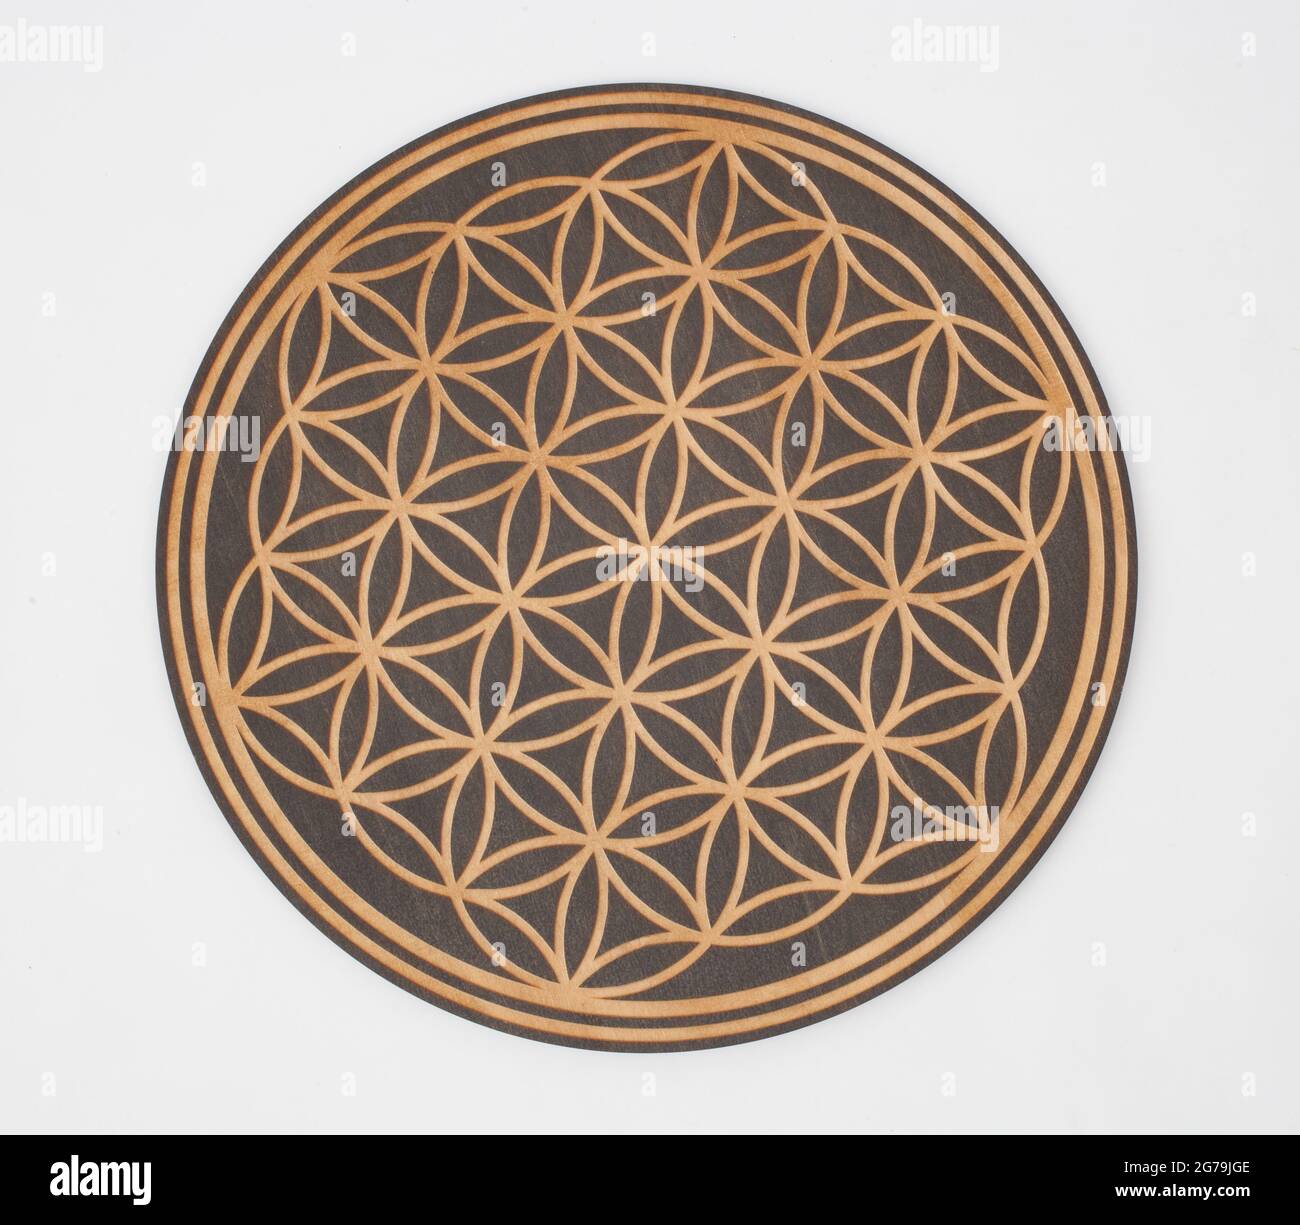 A wooden flower of life wooden board Stock Photo